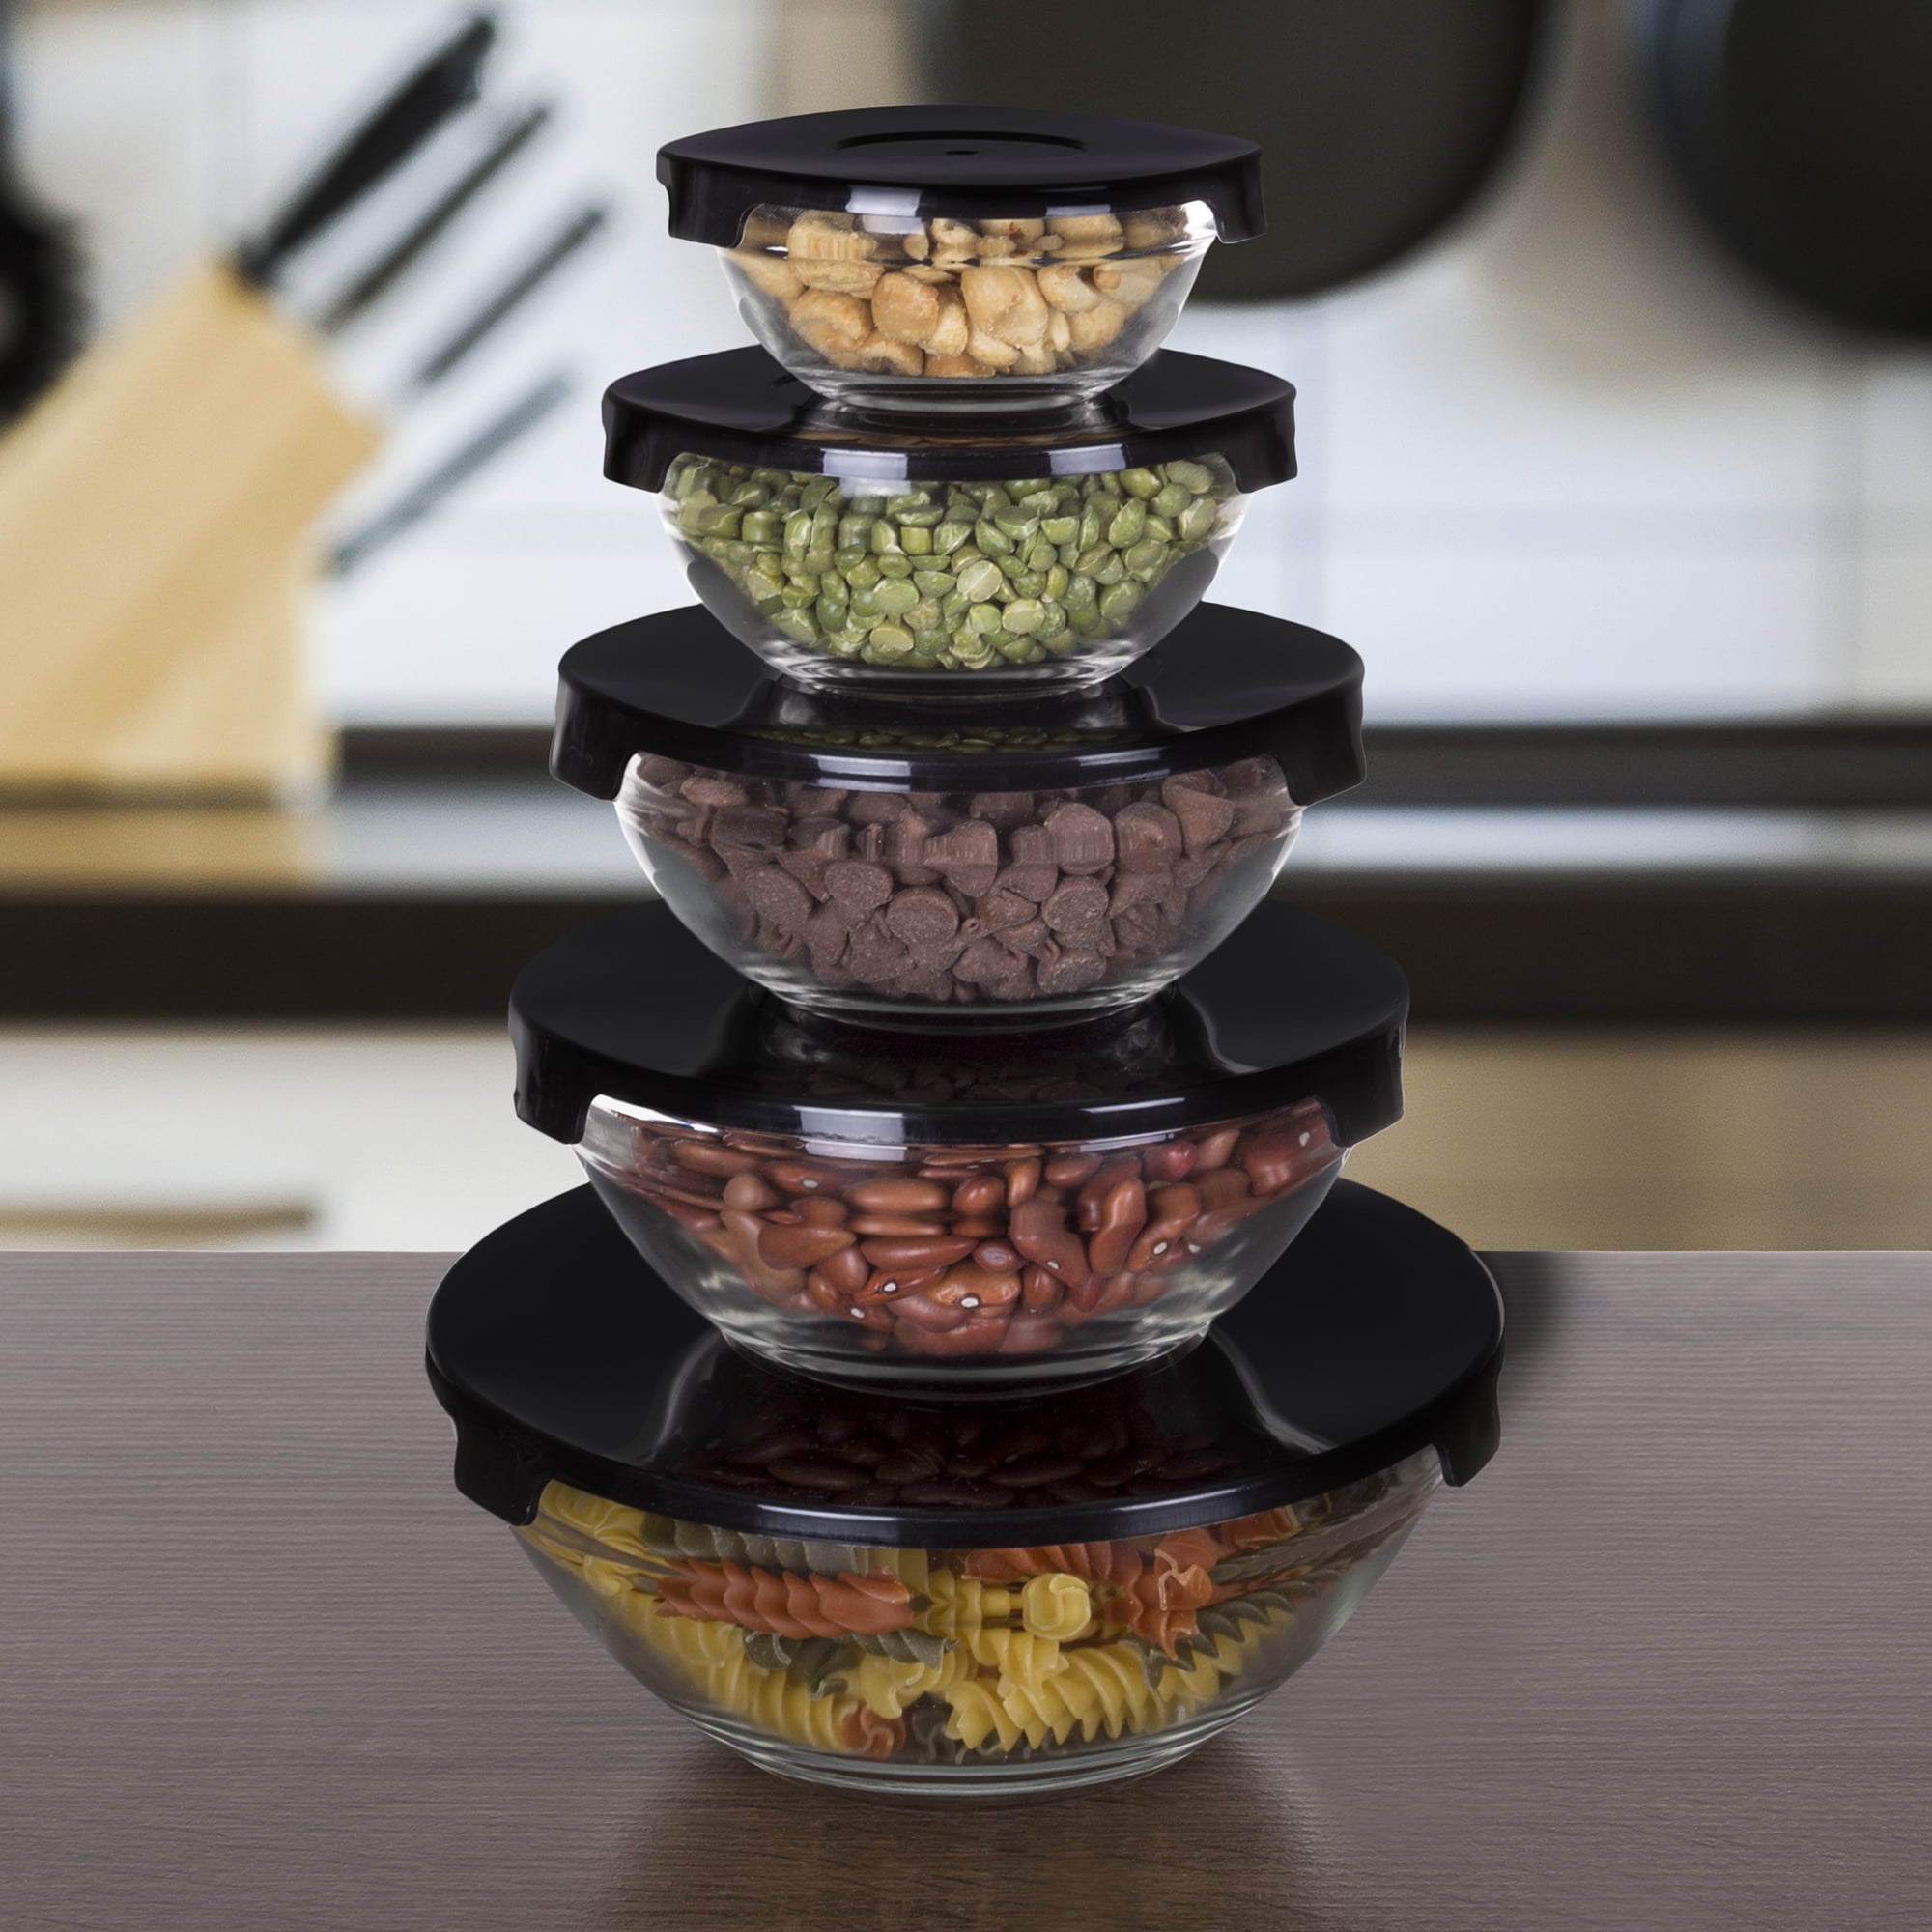 Zulay Kitchen Glass Food Storage Containers with Lids 5 ct Size 36 oz